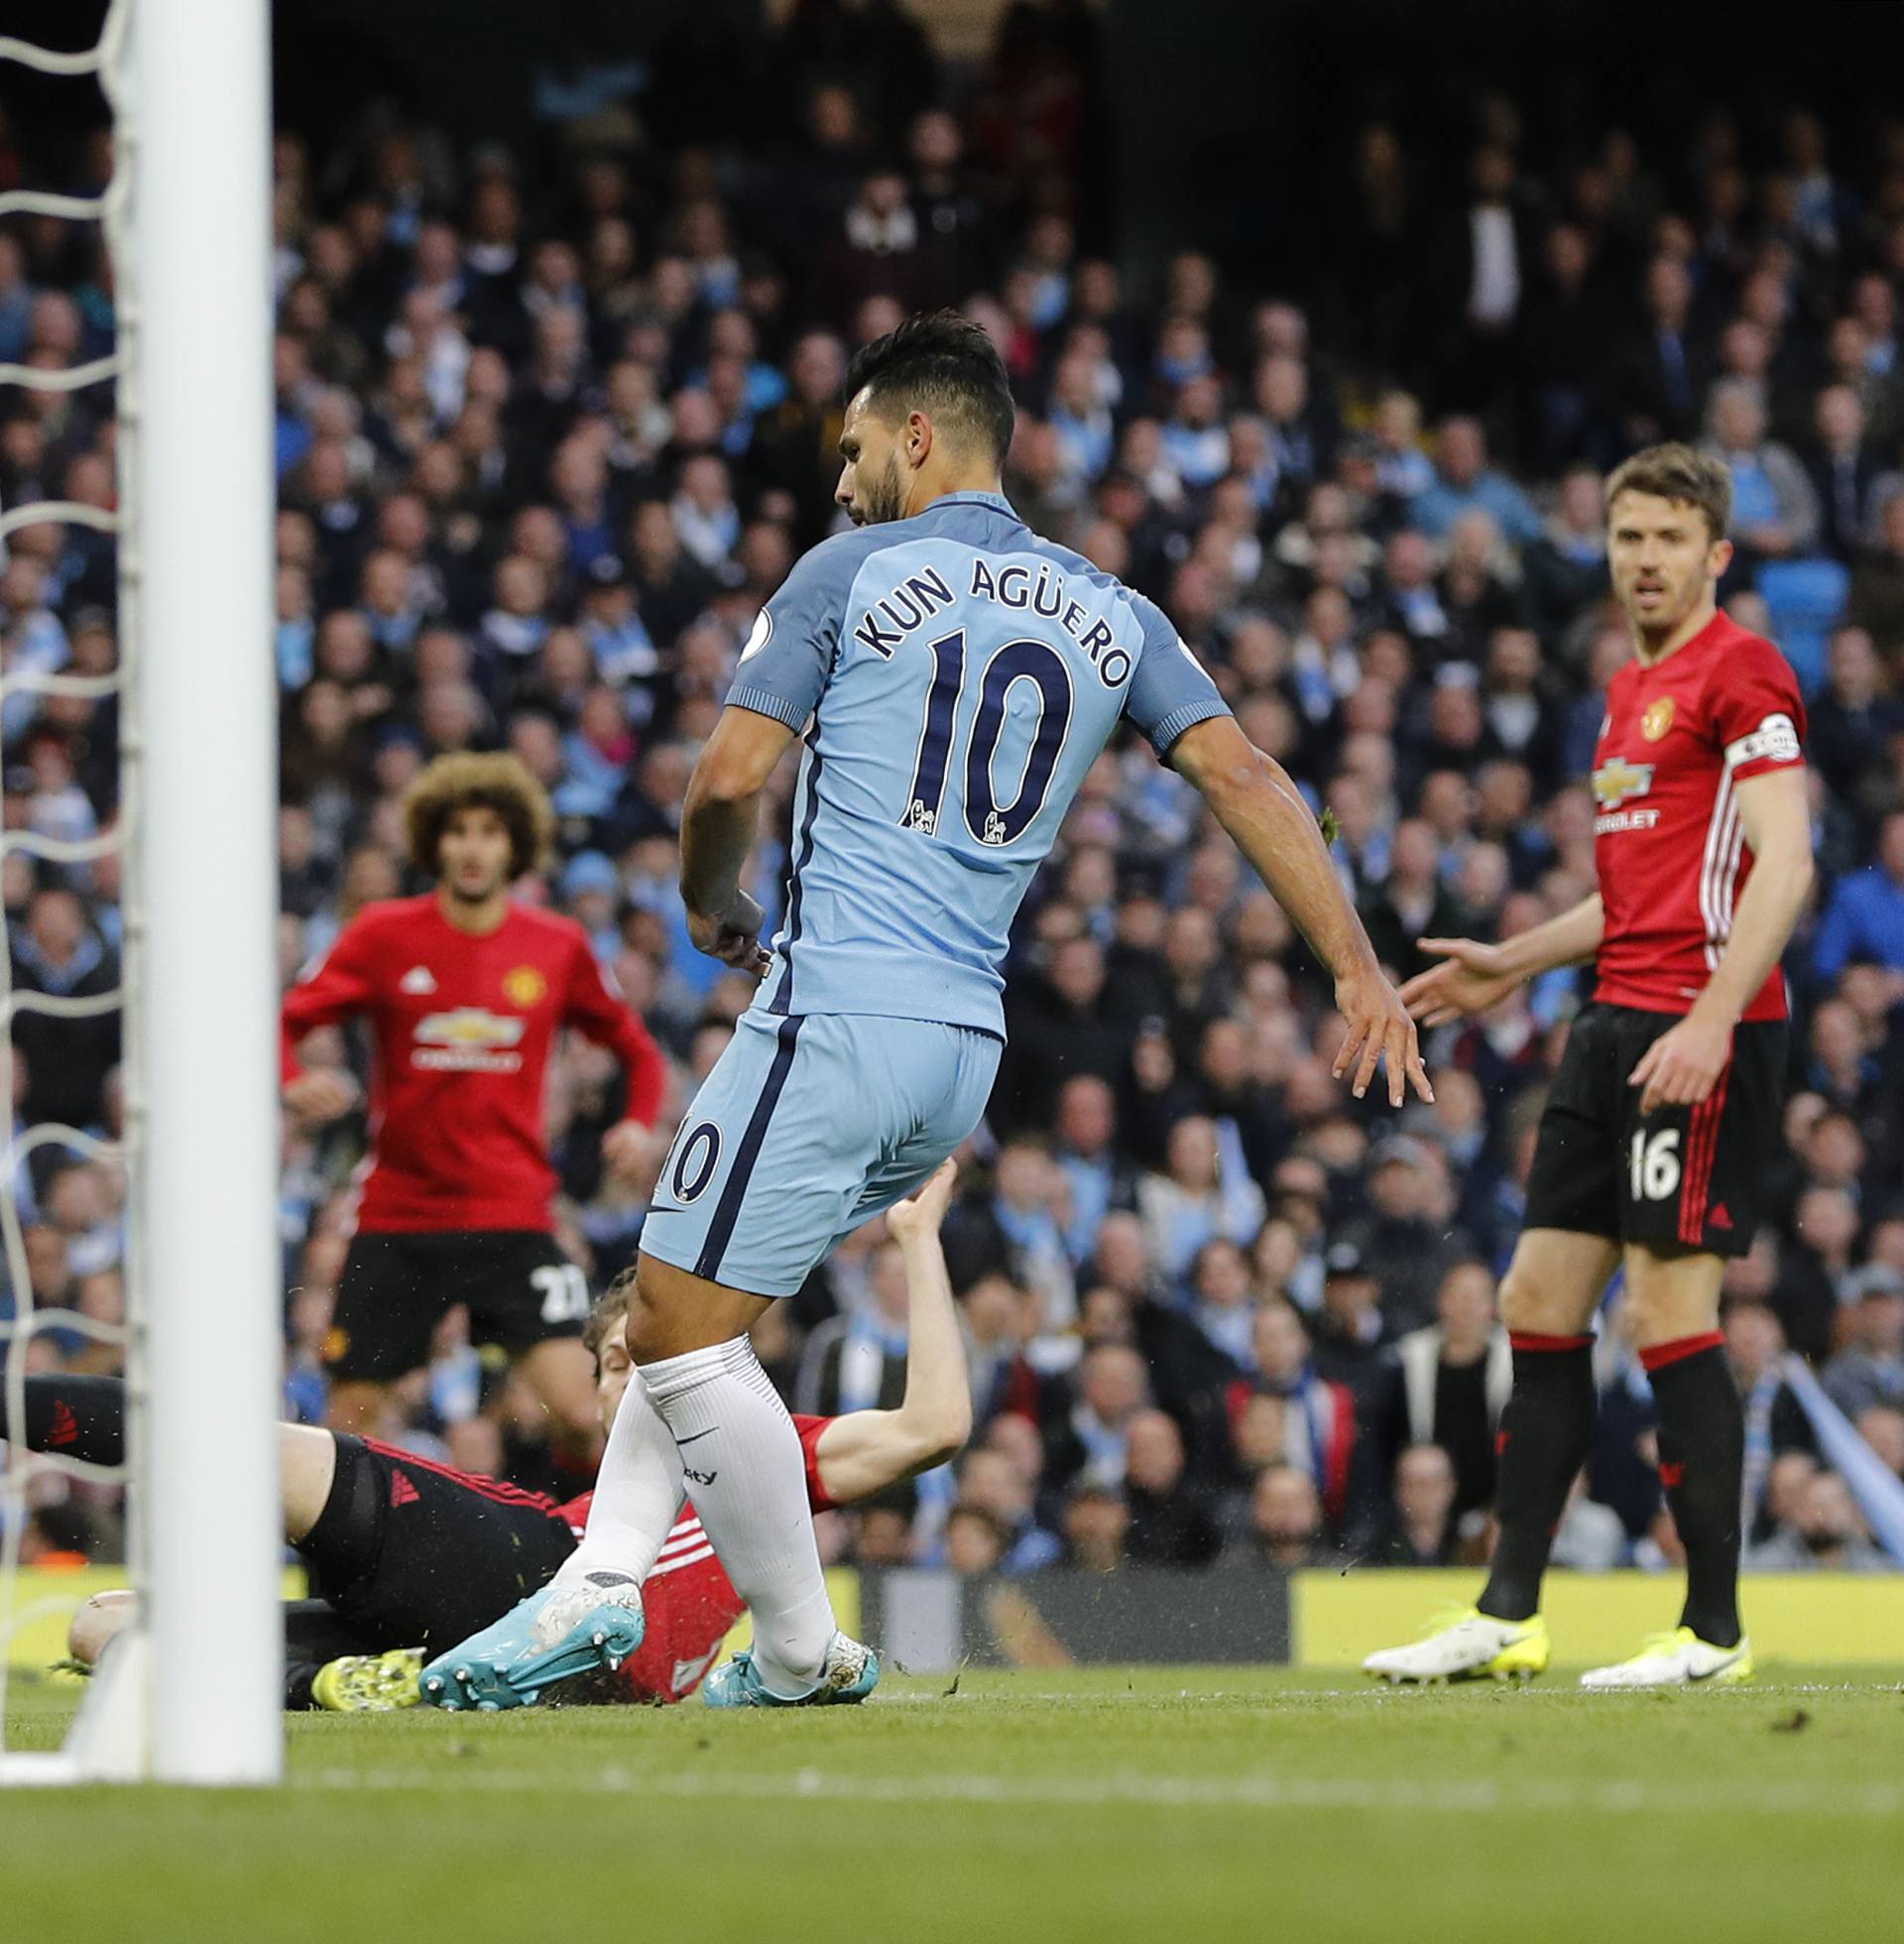 Manchester City's Sergio Aguero misses a chance to score